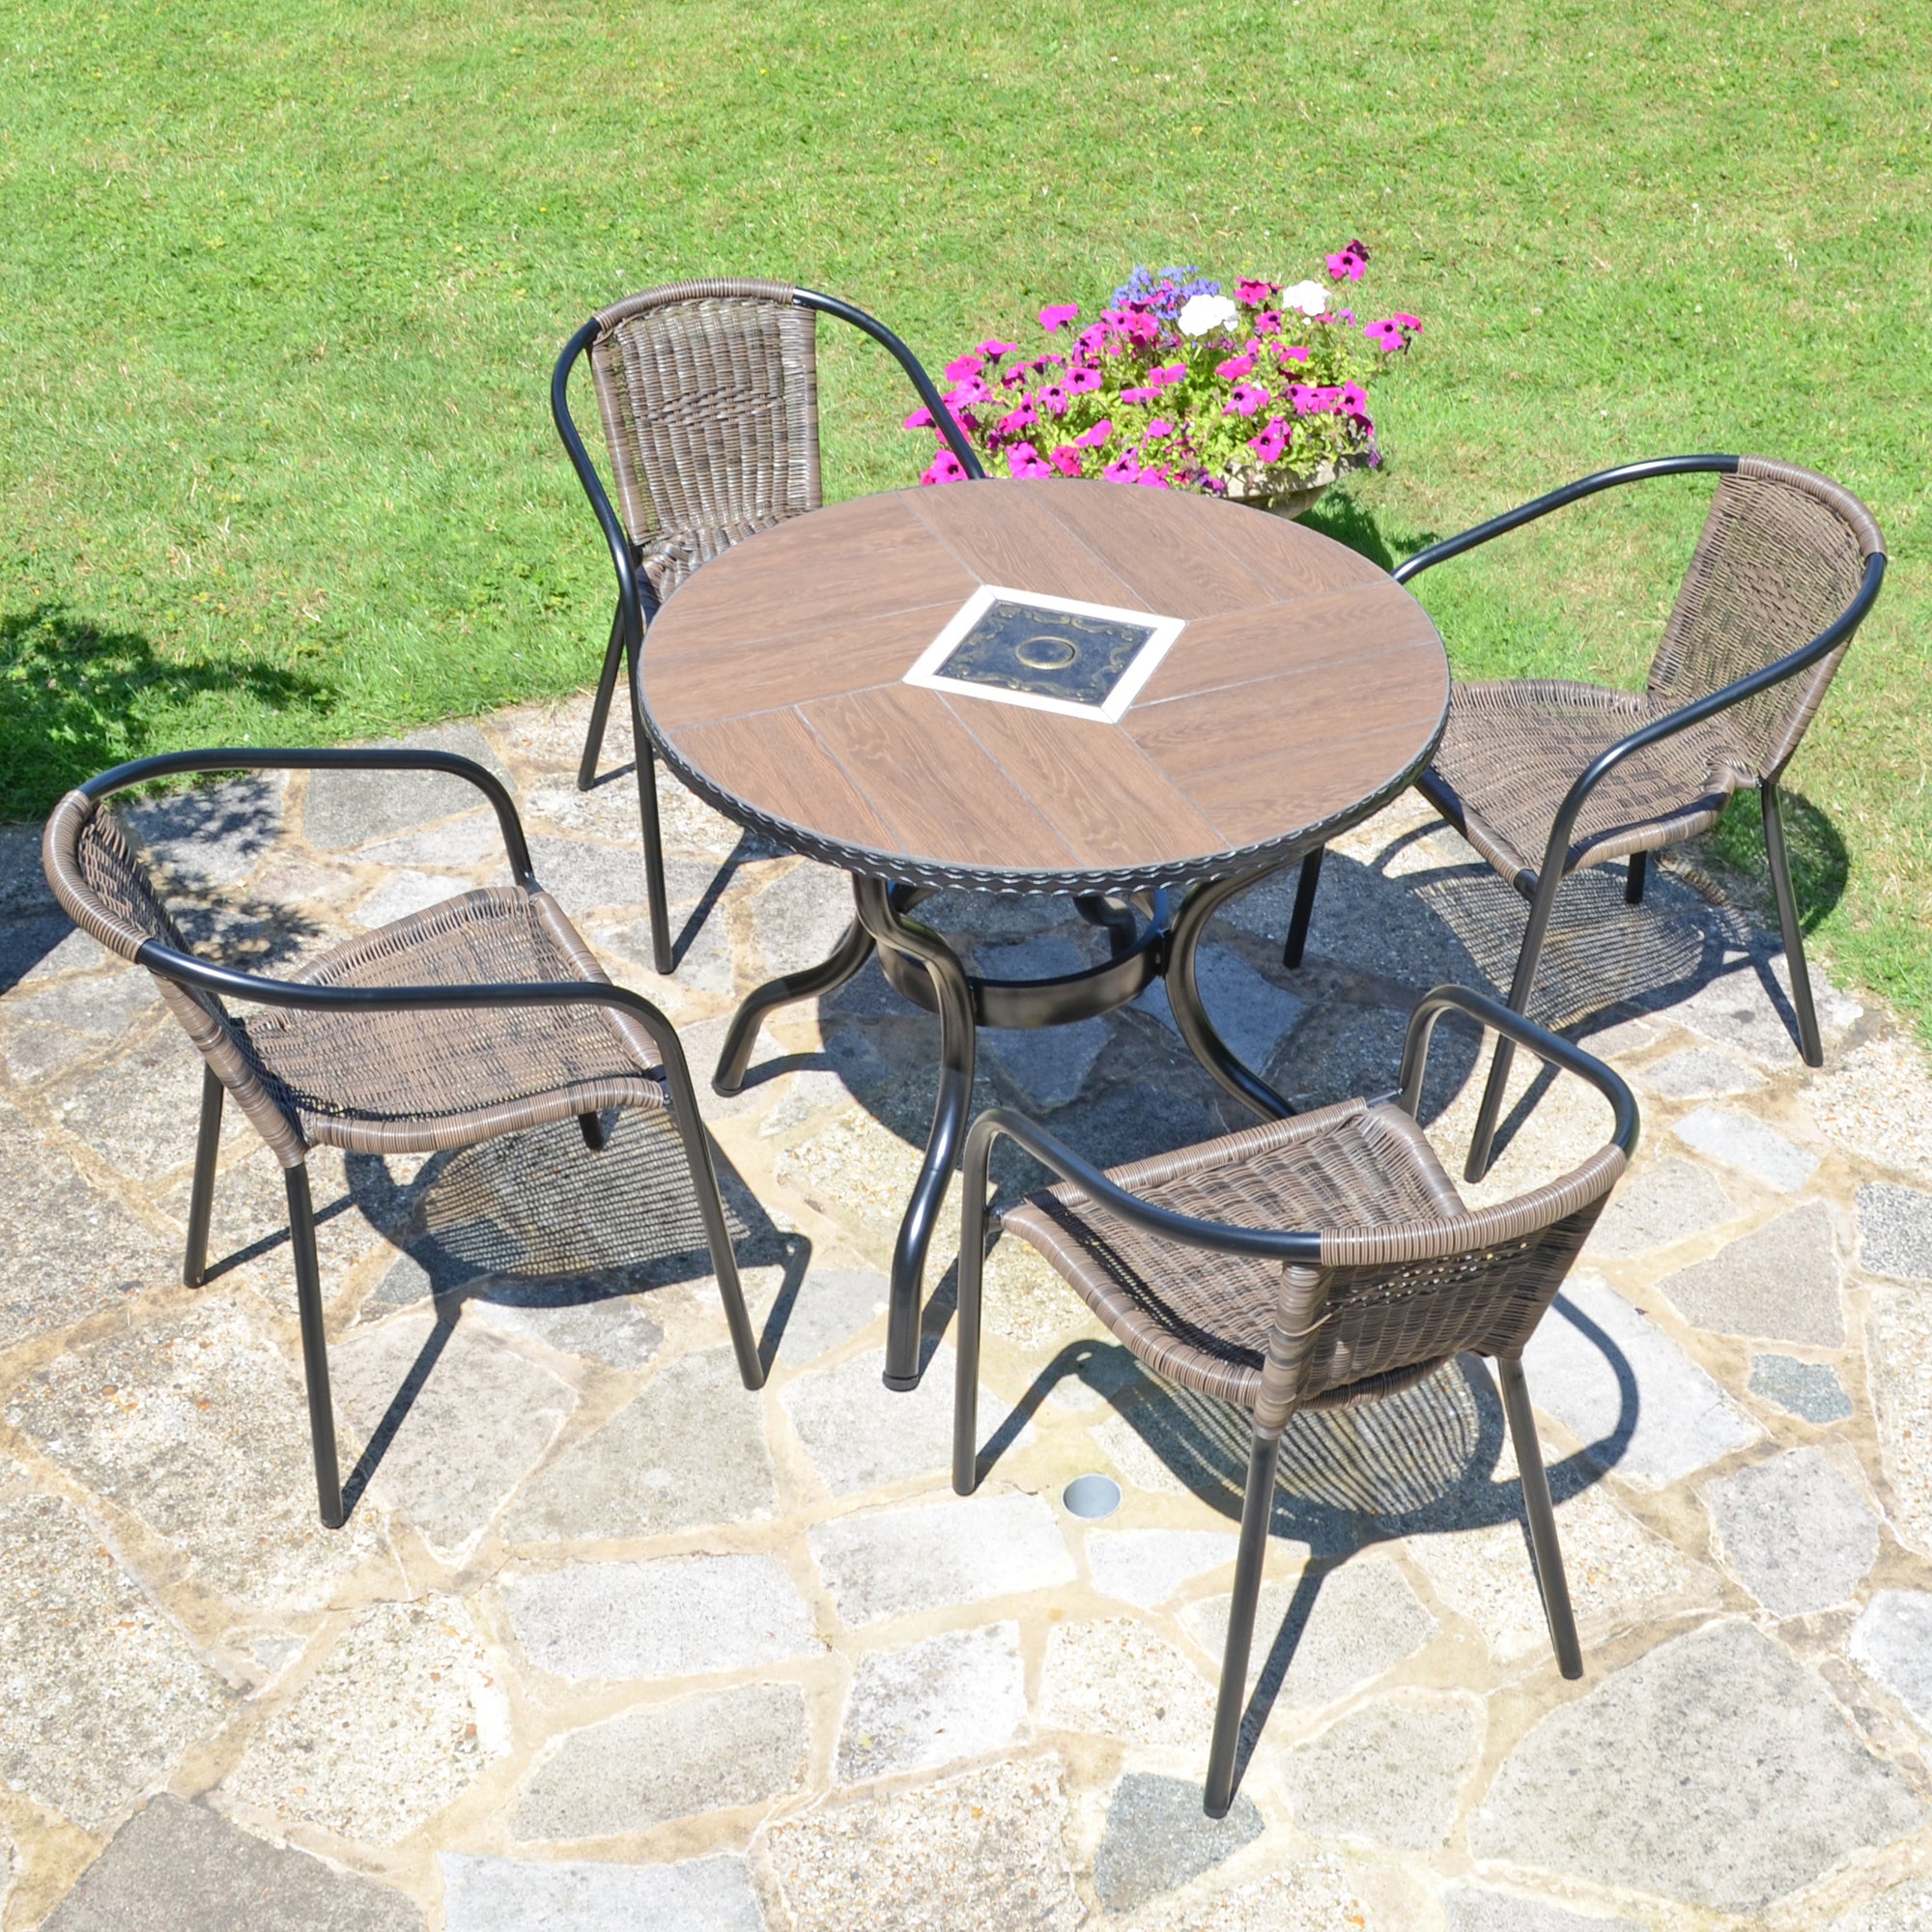 Harrison 91cm Patio Table with 4 Springdale Chairs Set Brown